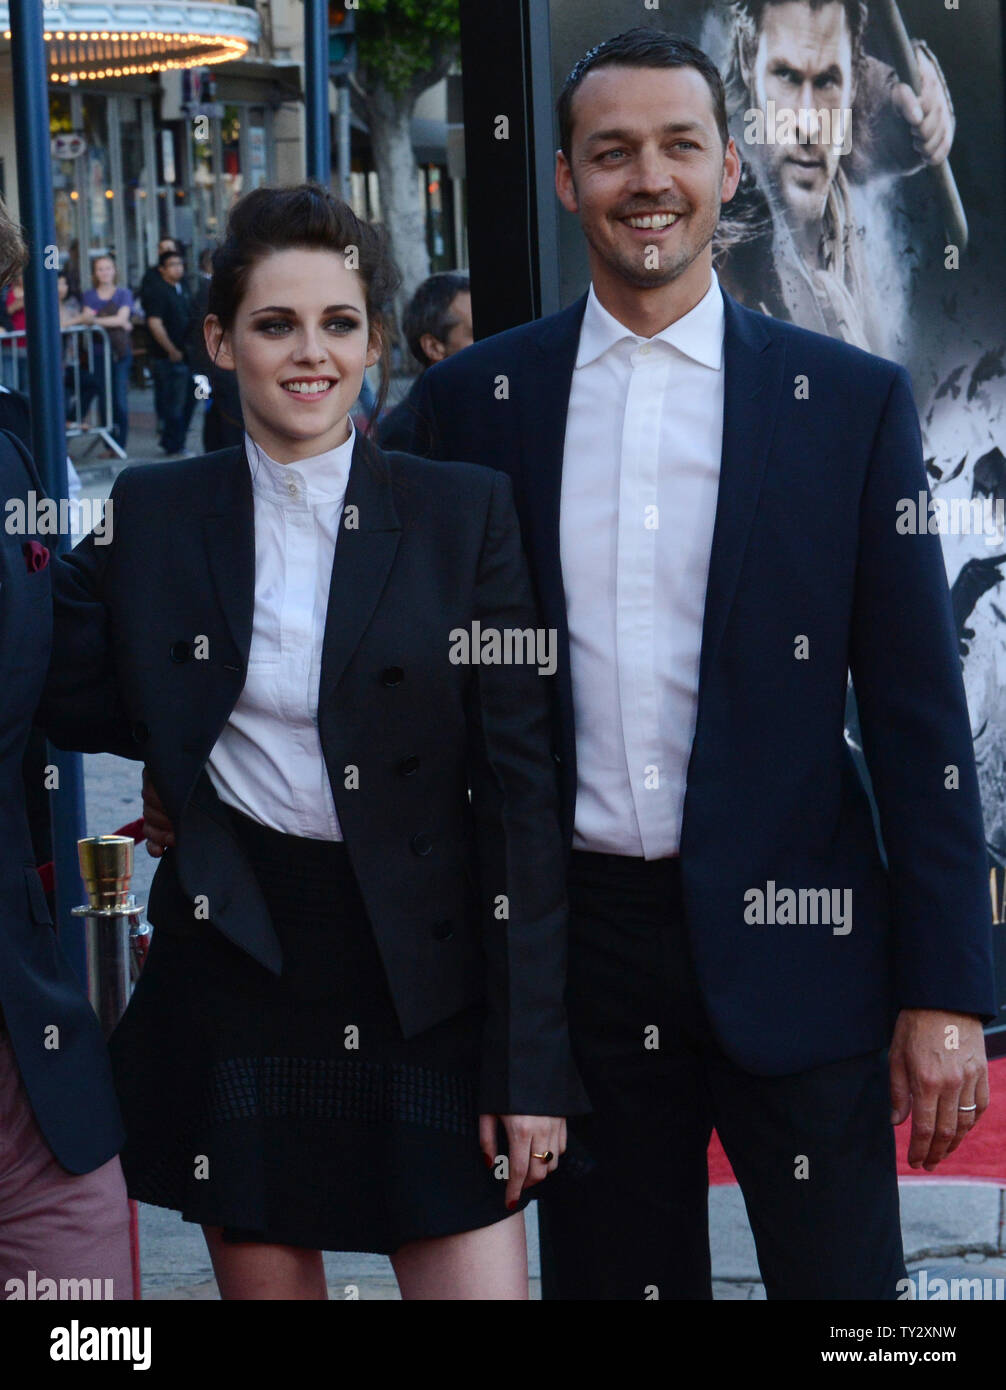 Director Rupert Sanders (R) attends a screening of his new motion picture fantasy 'Snow White and the Huntsman', with cast member Kristen Stewart (L), at the Village Theatre in the Westwood section of Los Angeles on May 29, 2012.  UPI/Jim Ruymen Stock Photo